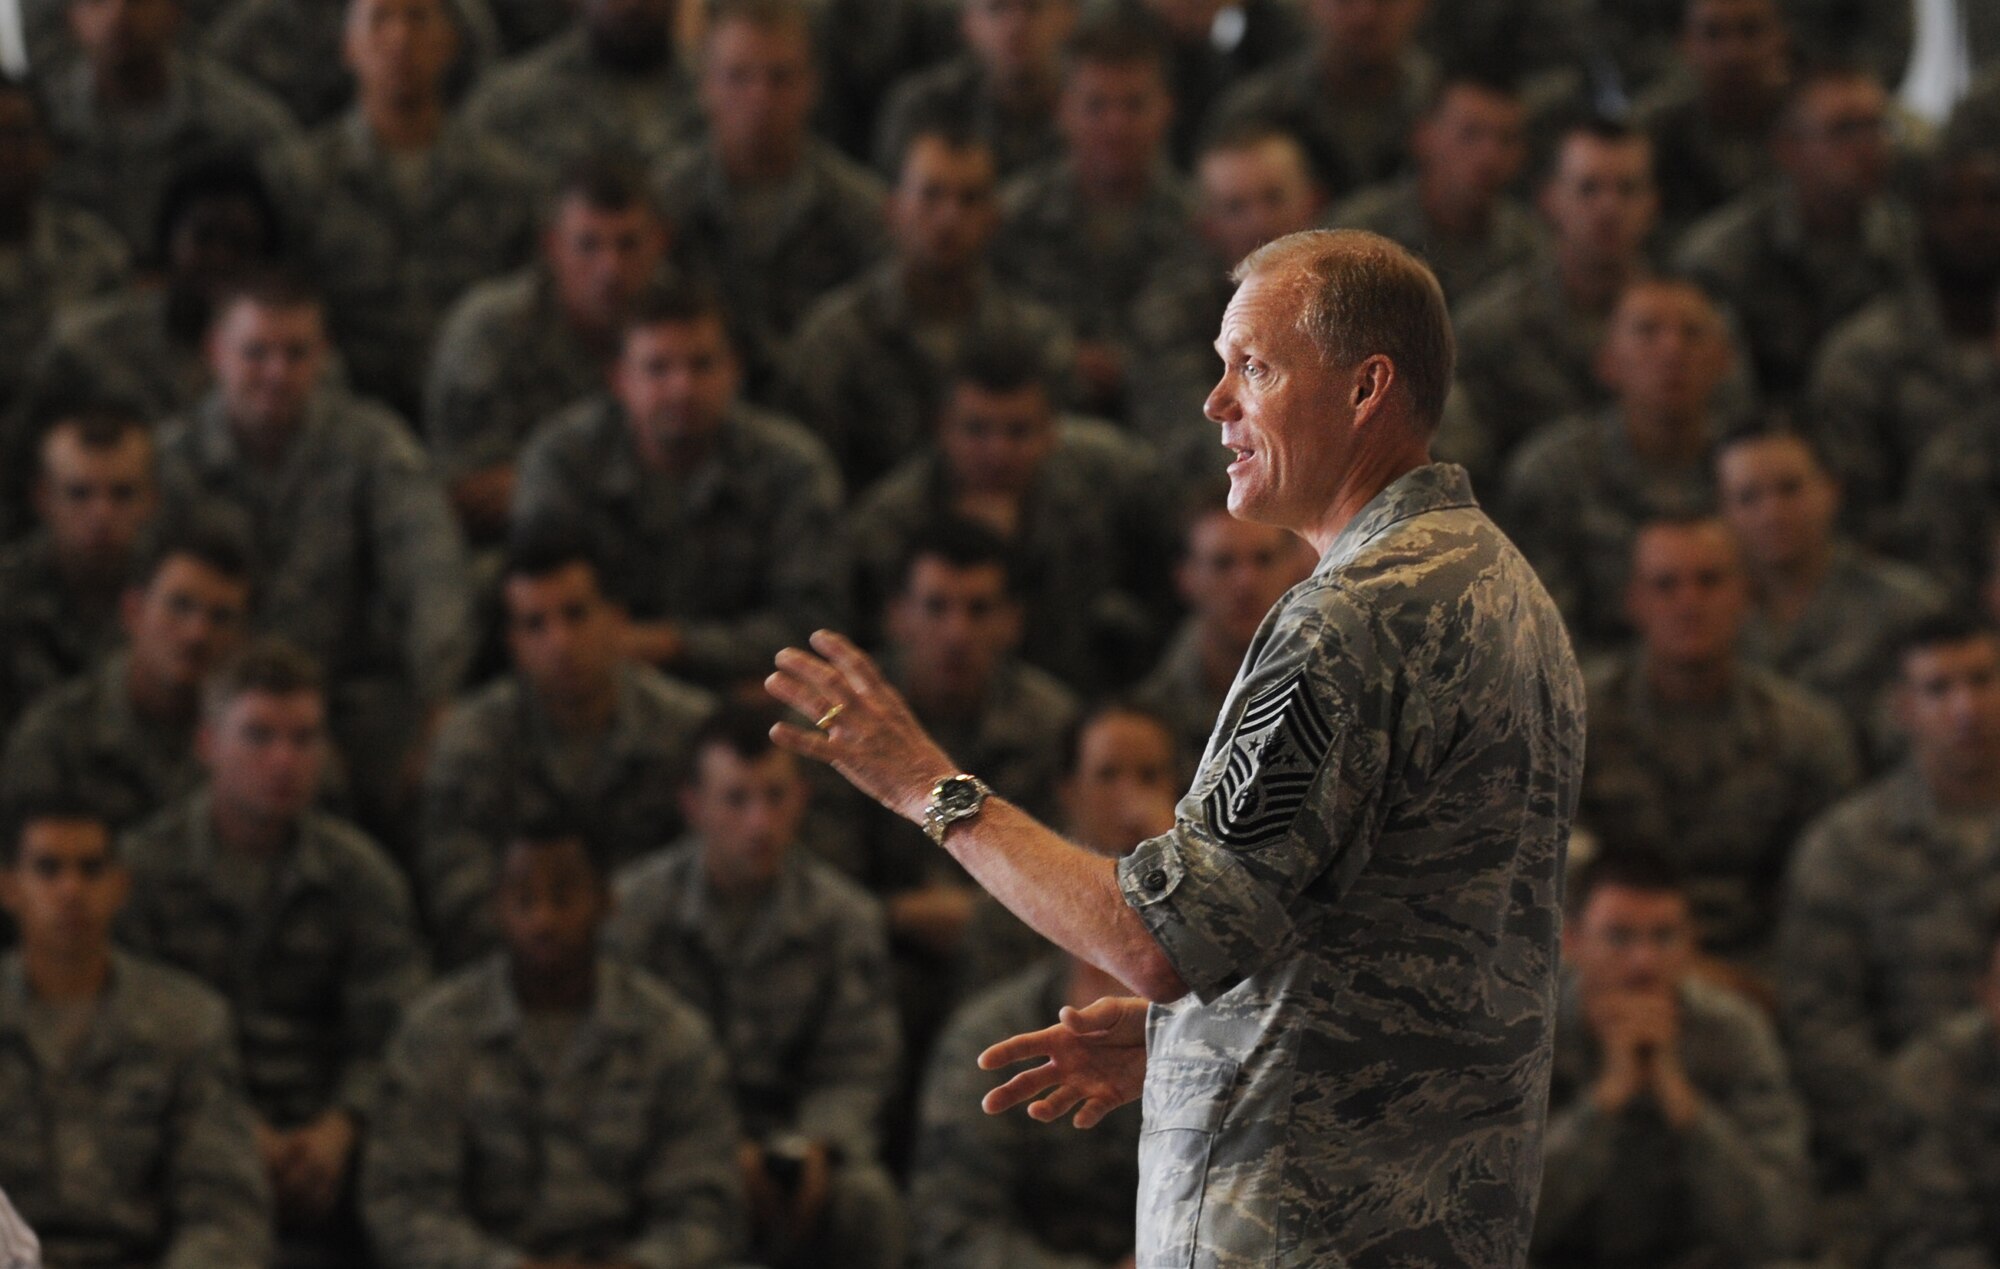 Chief Master Sgt. of the Air Force, James Cody addresses the Airmen of Minot Air Force Base, N.D., at an all call event July 12, 2013. Airmen were able to ask questions regarding the topics foremost on their minds and the event was also streaming live to those deployed to the missile complex. (U.S. Air Force photo/ Airman 1st Class Stephanie Ashley)